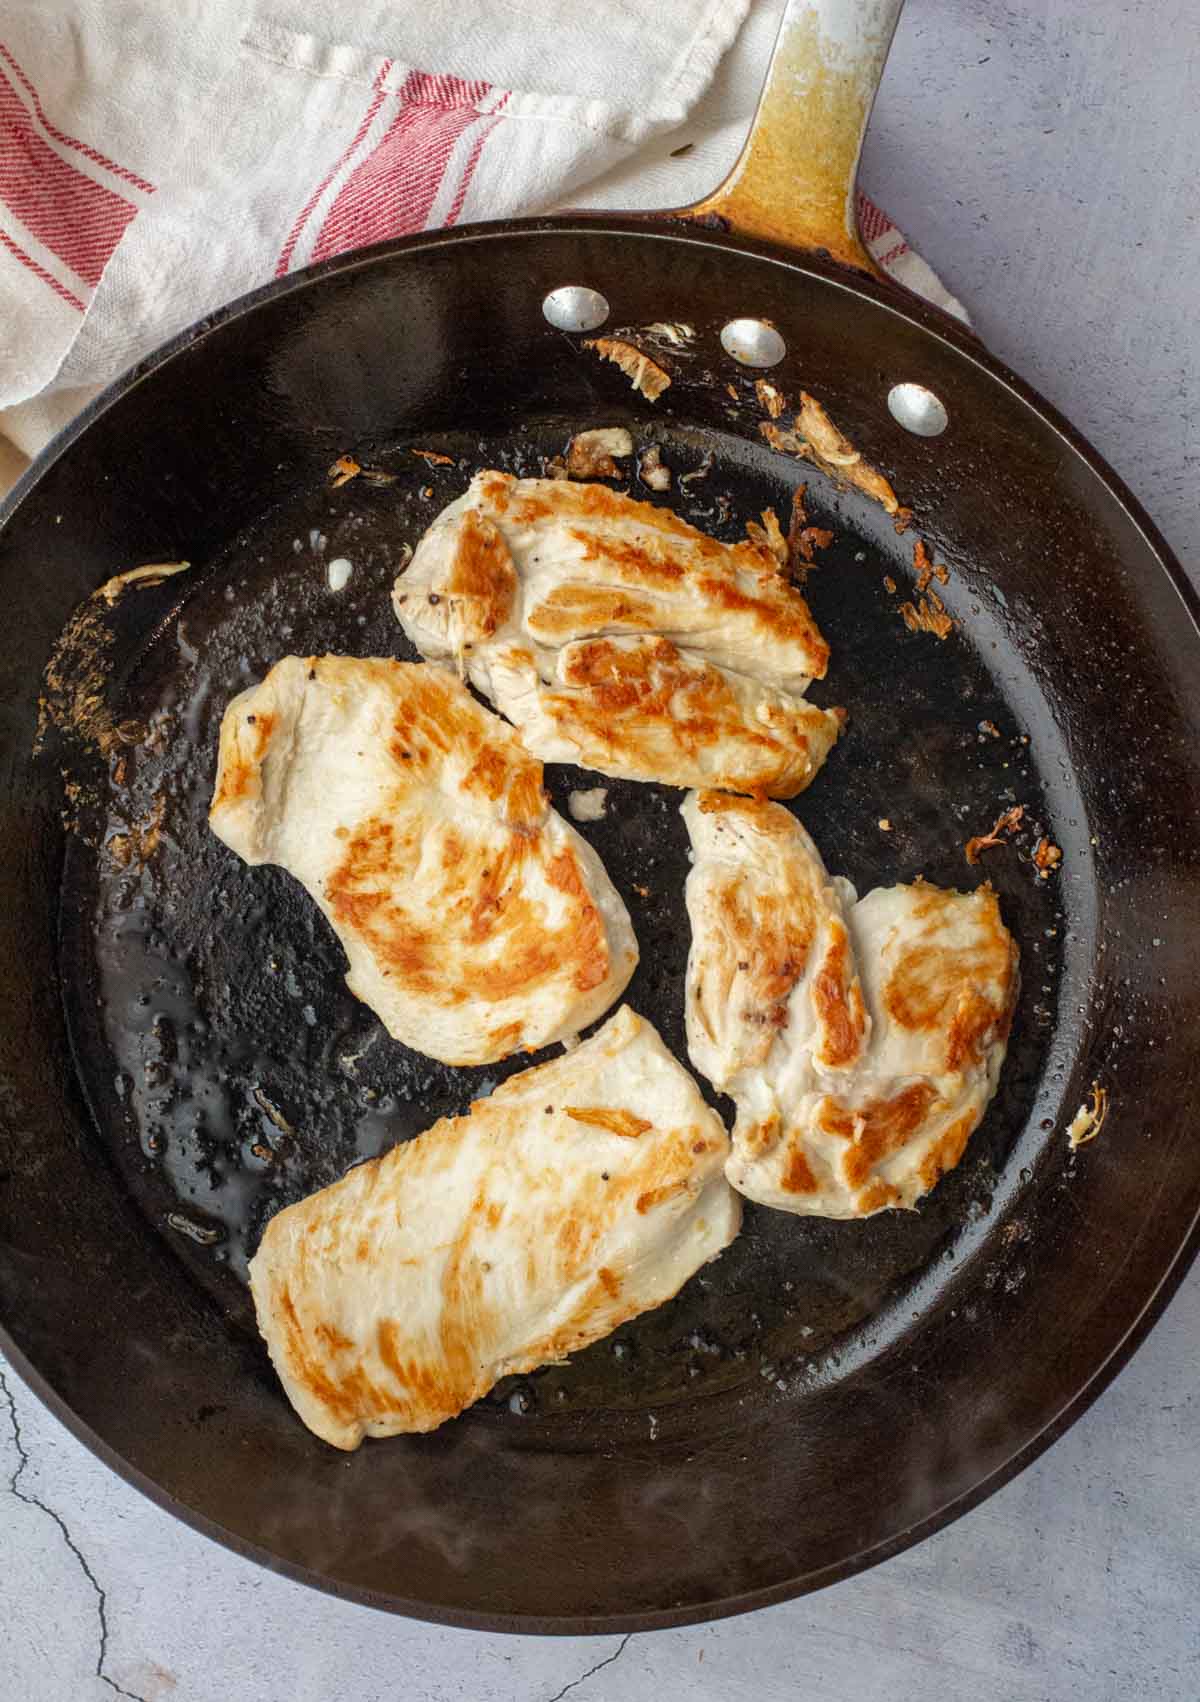 Searing chicken breast cutlets in a heavy skillet.